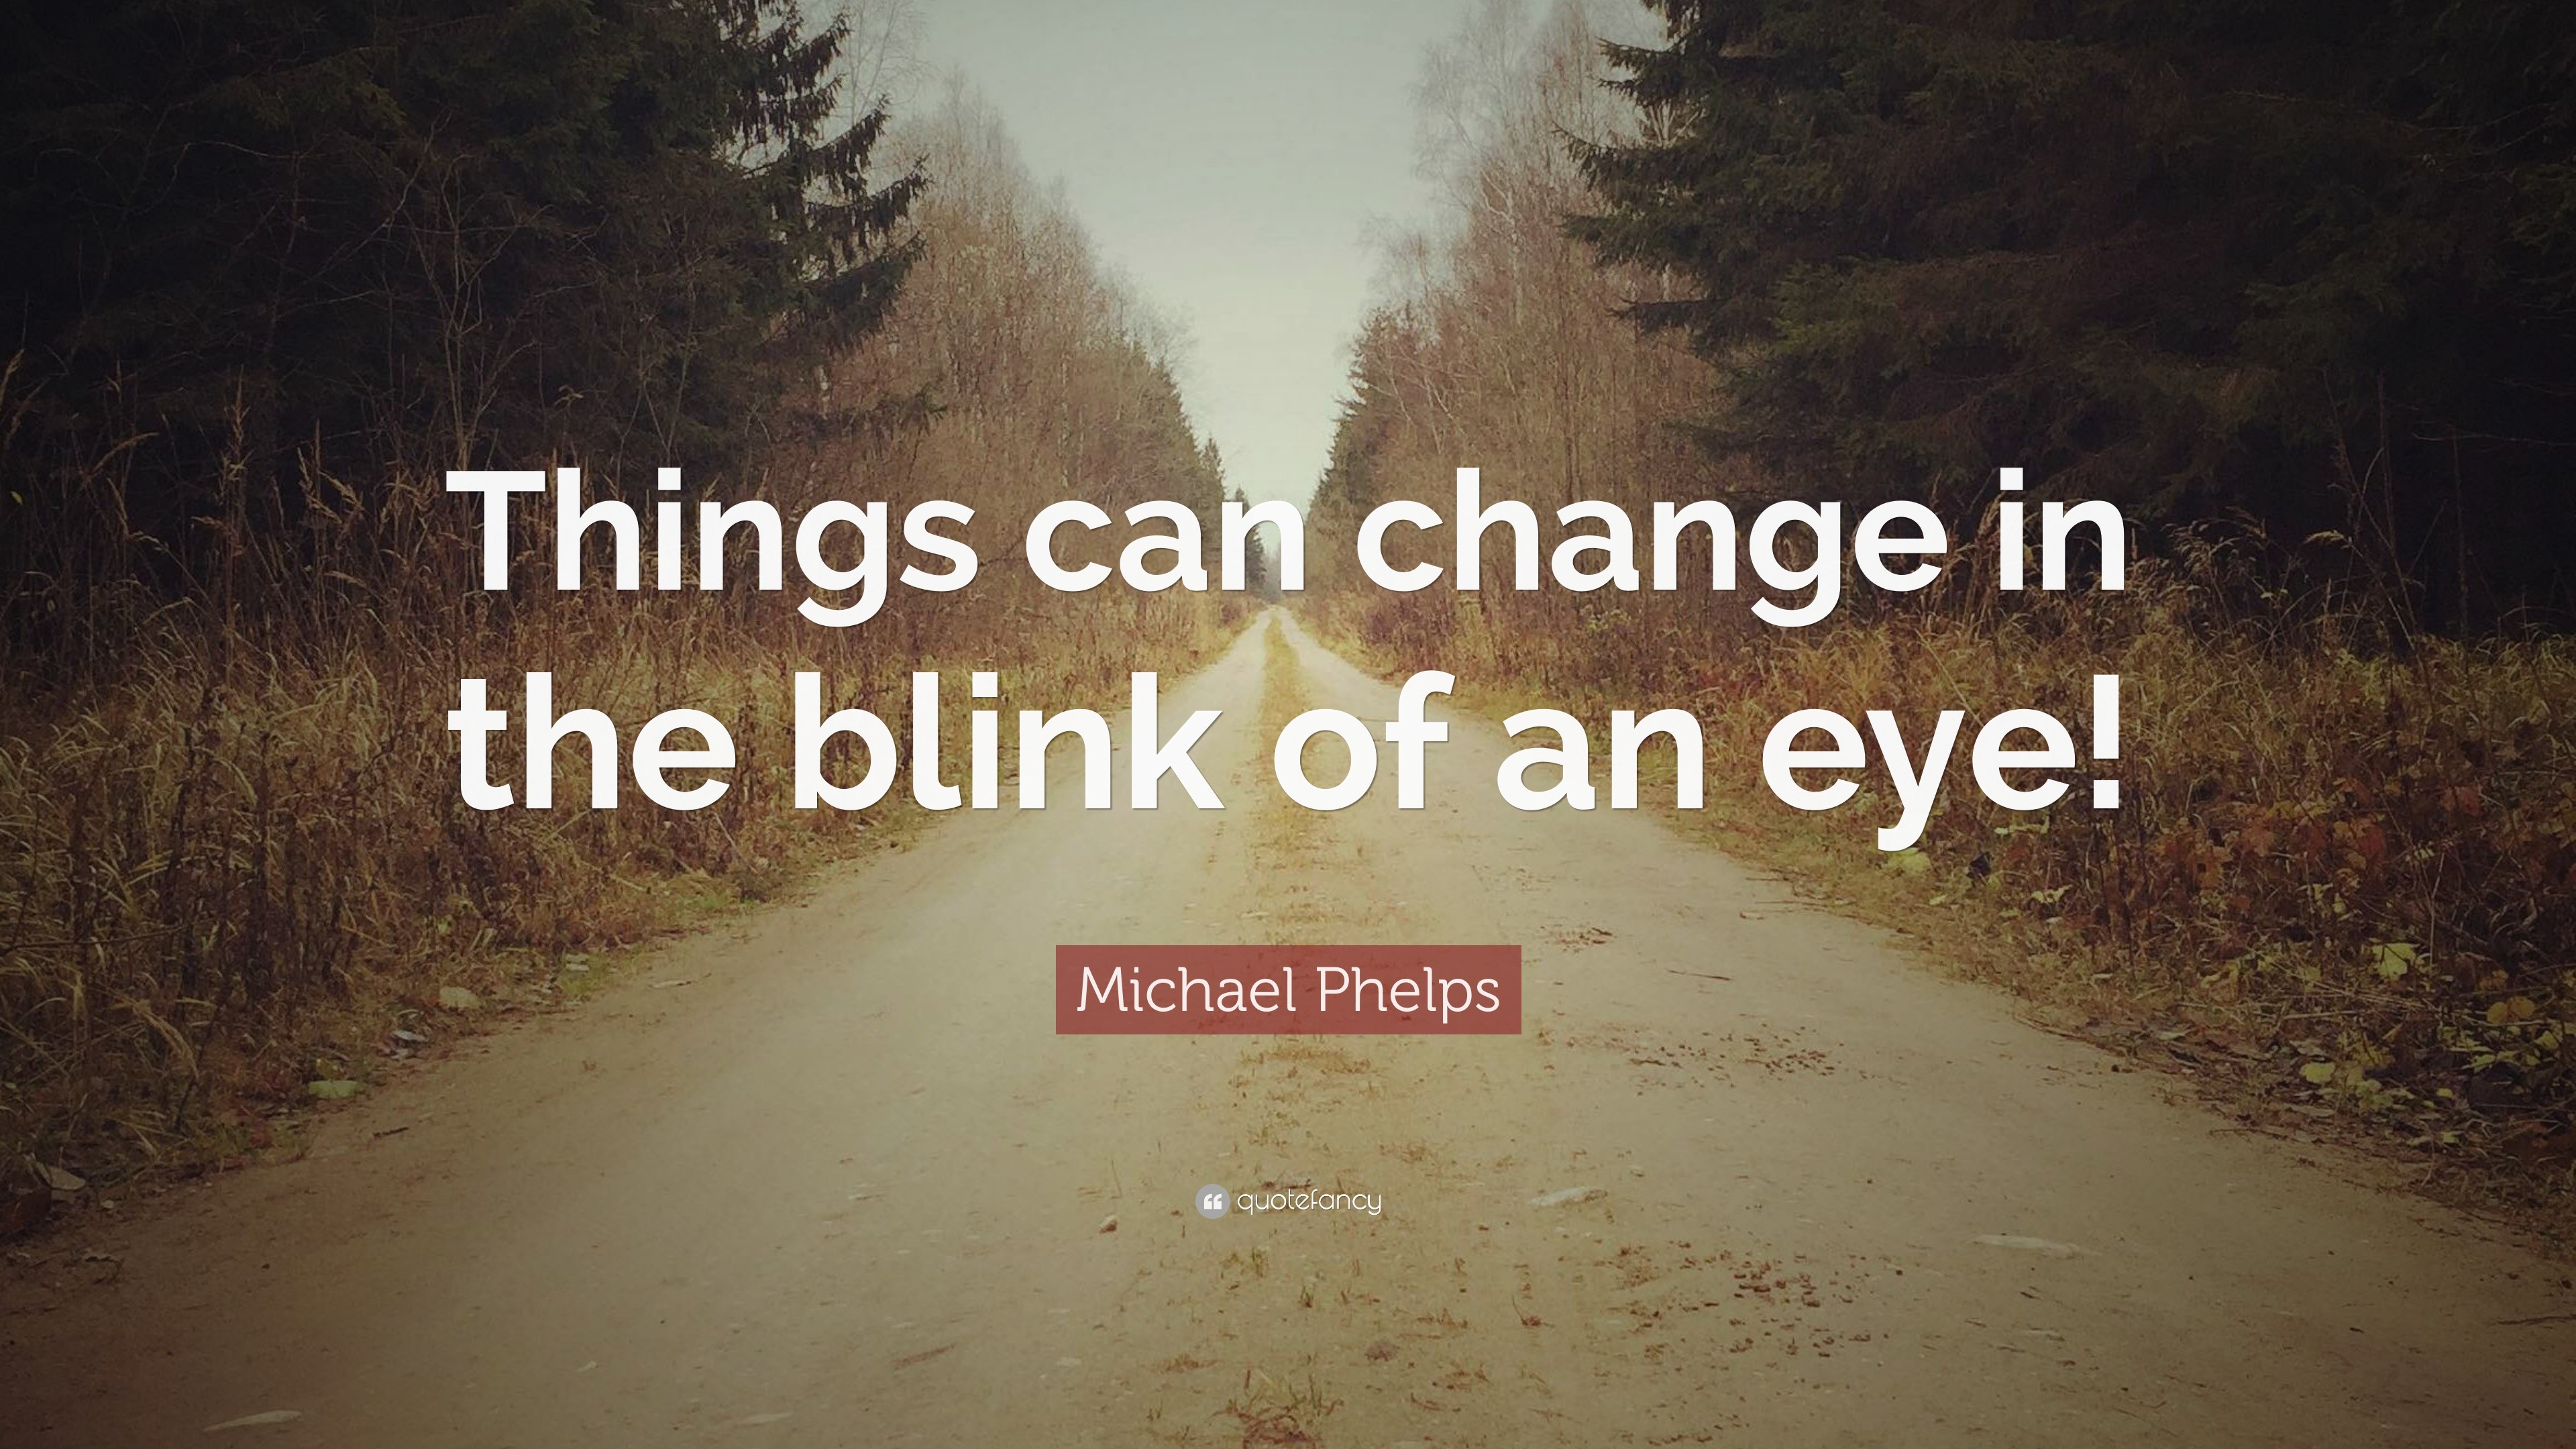 Michael Phelps Quote: “Things can change in the blink of an eye!”